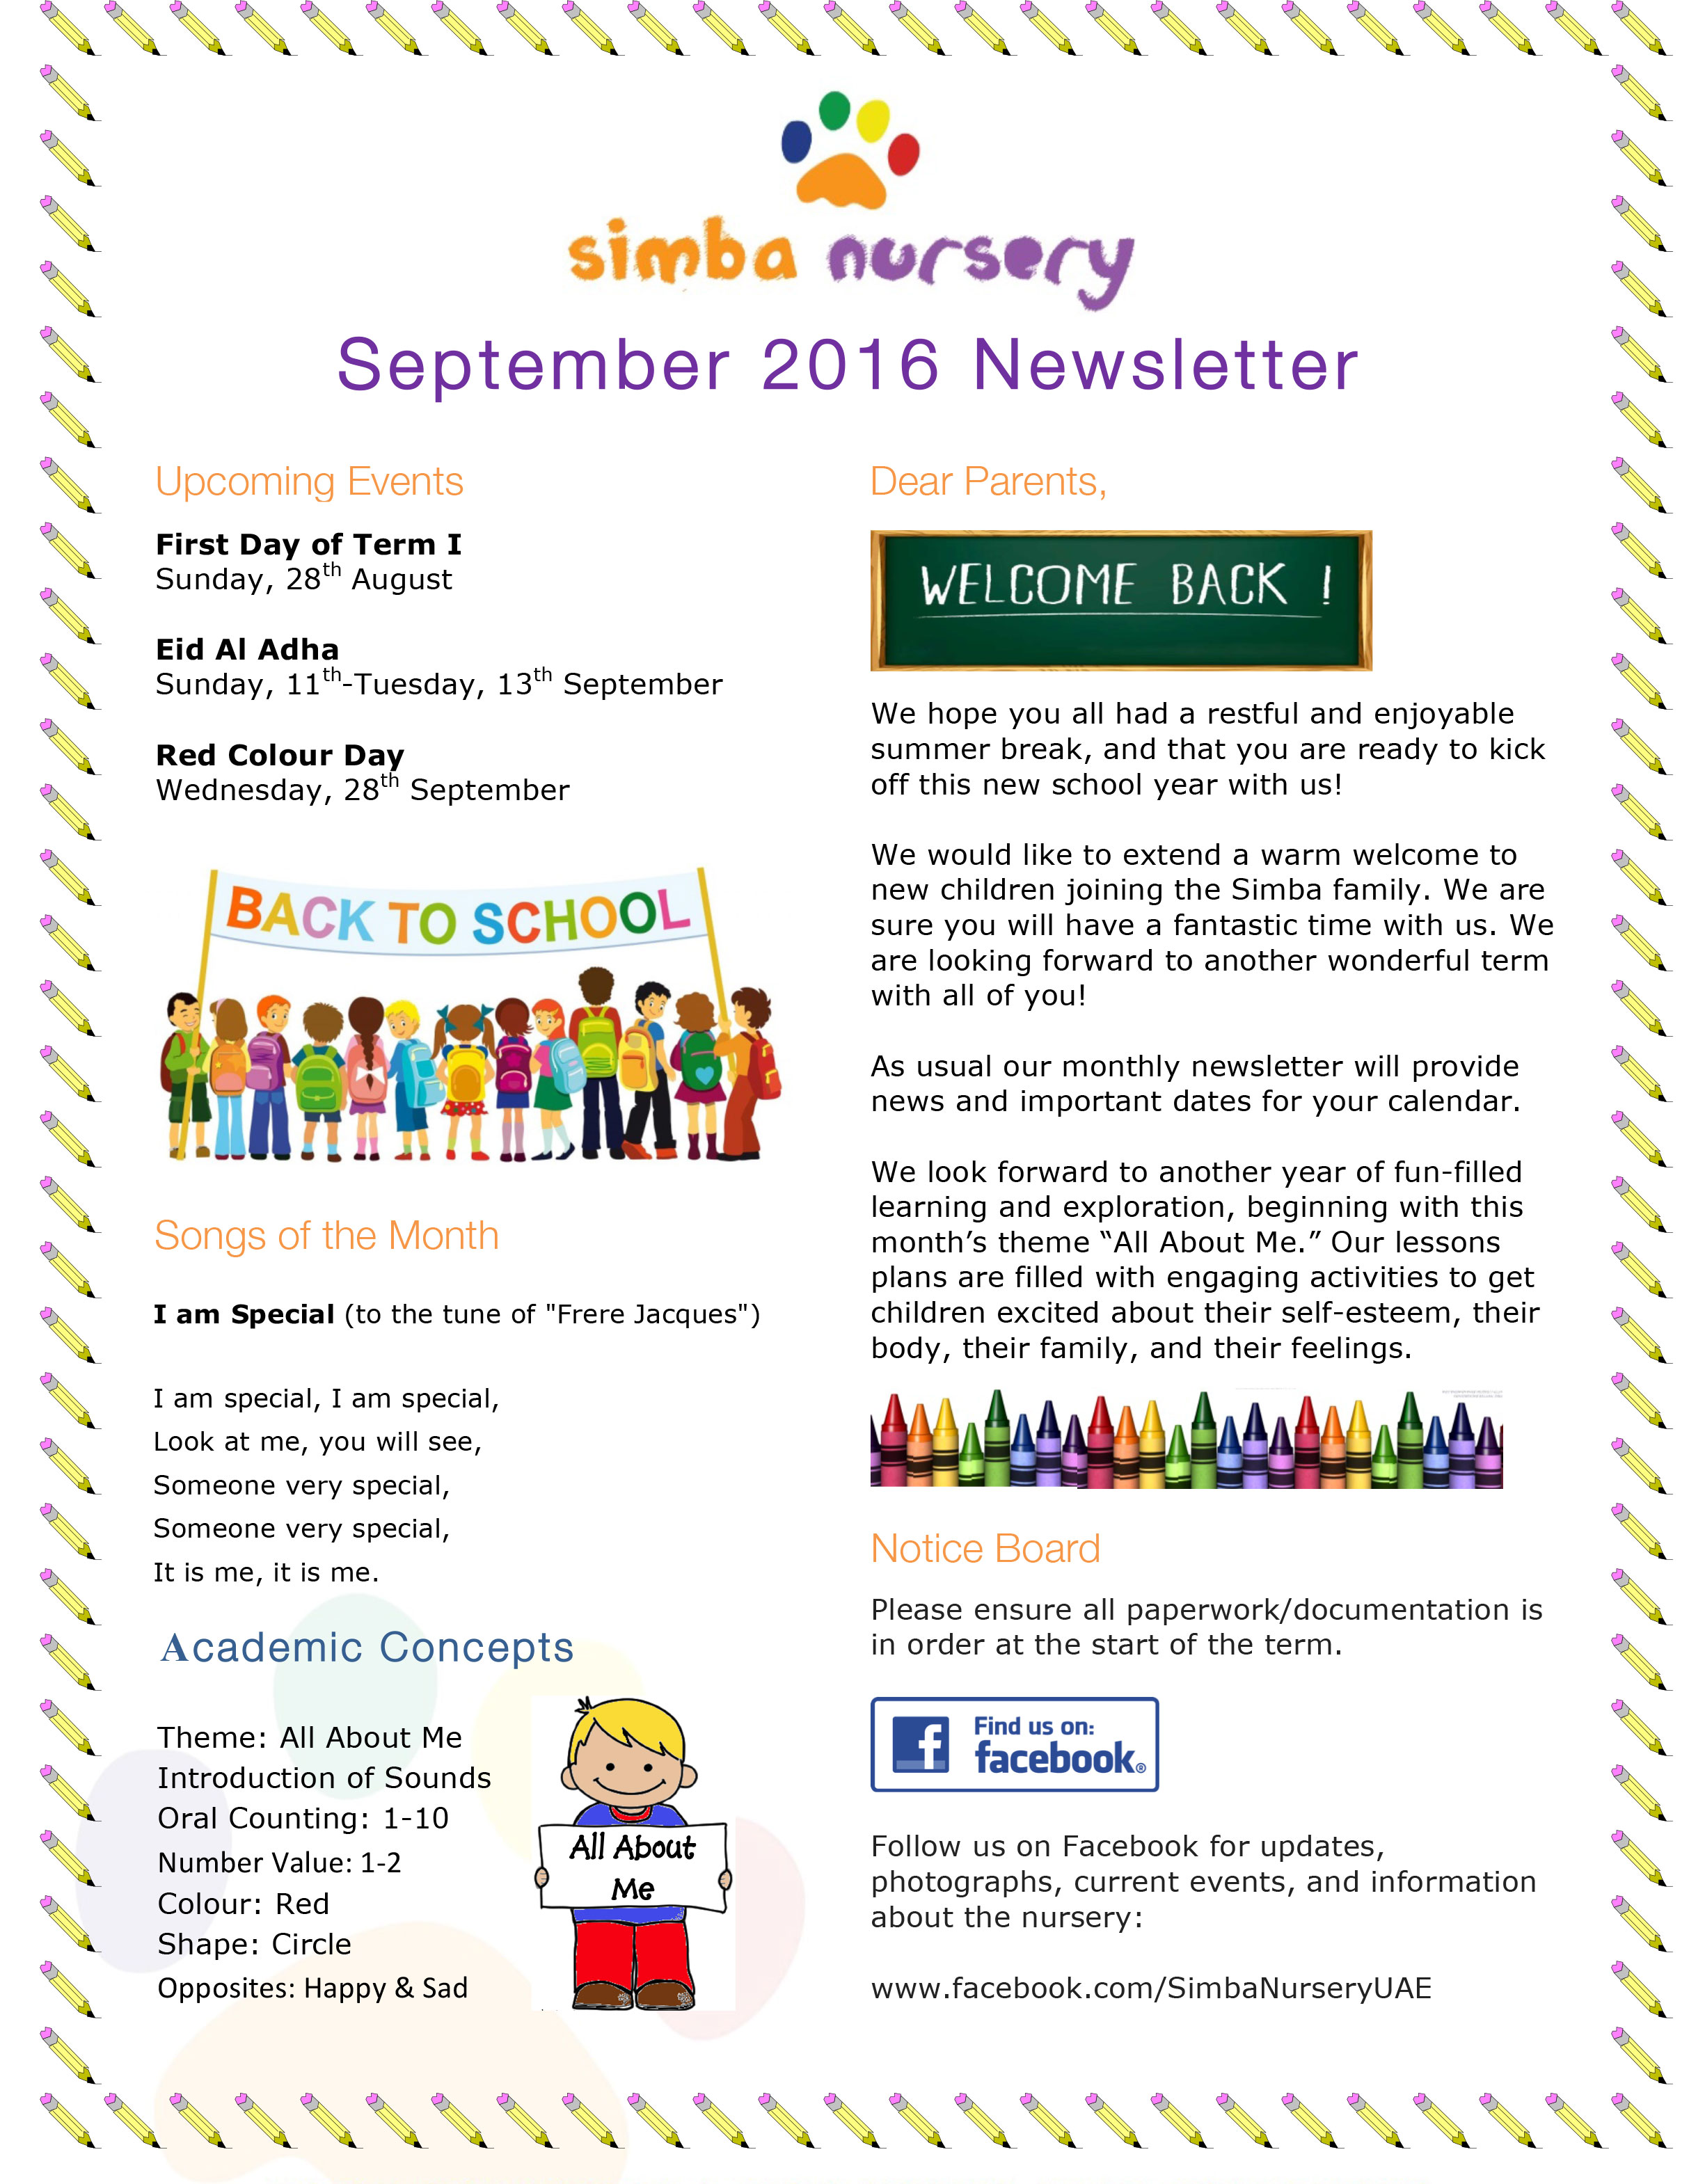 examples of newsletters for early intervention